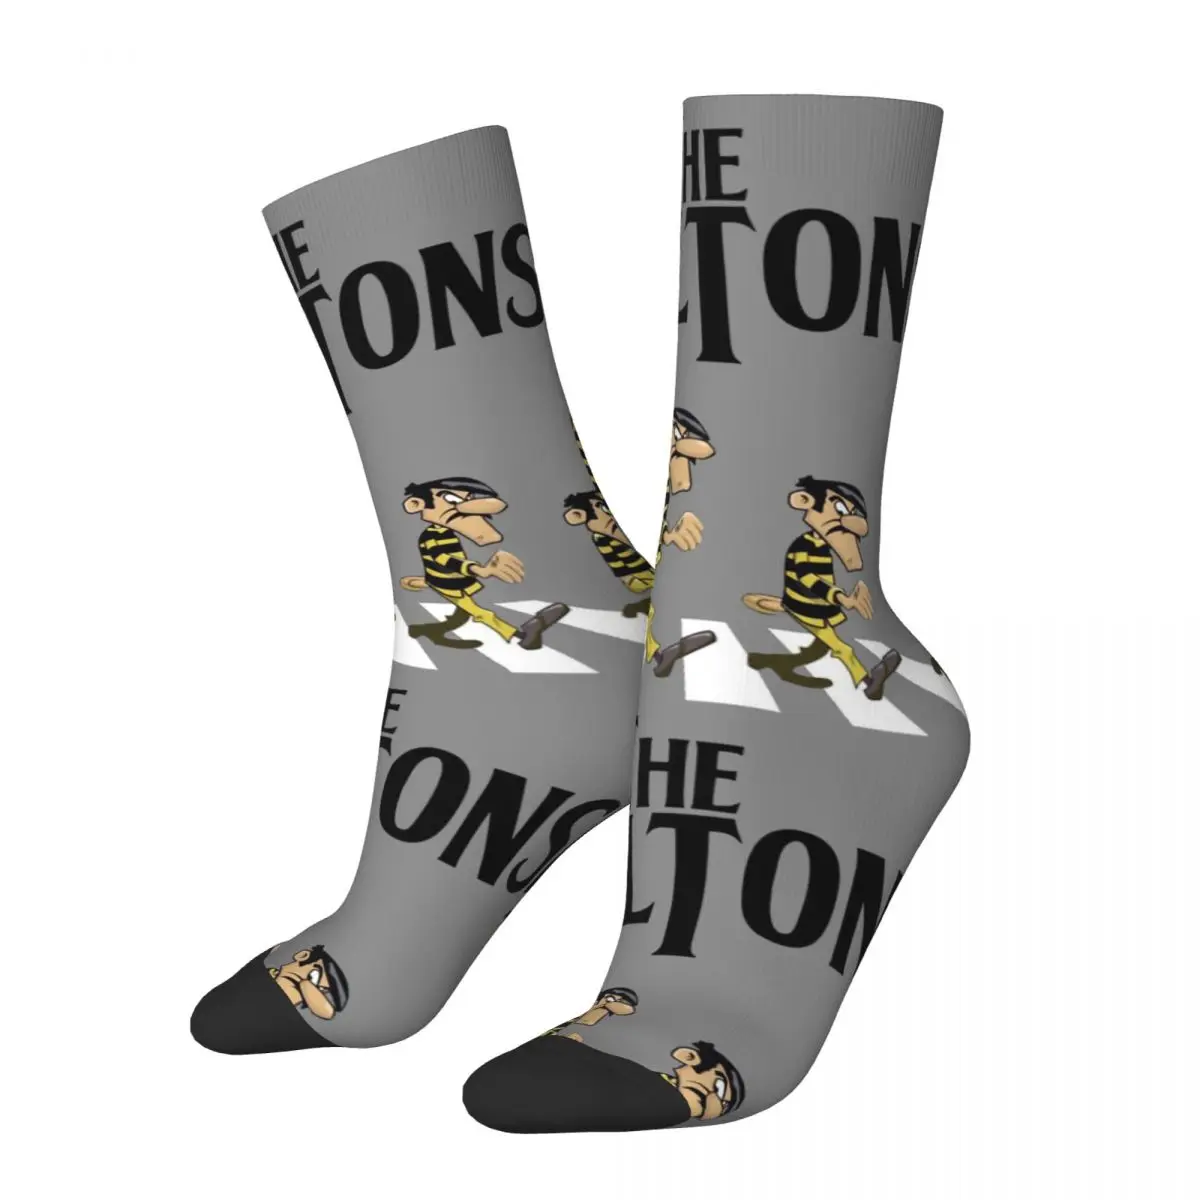 

Funny Crazy compression Each Form Sock for Men Hip Hop Harajuku T-The Daltons Happy Quality Pattern Printed Boys Crew Sock